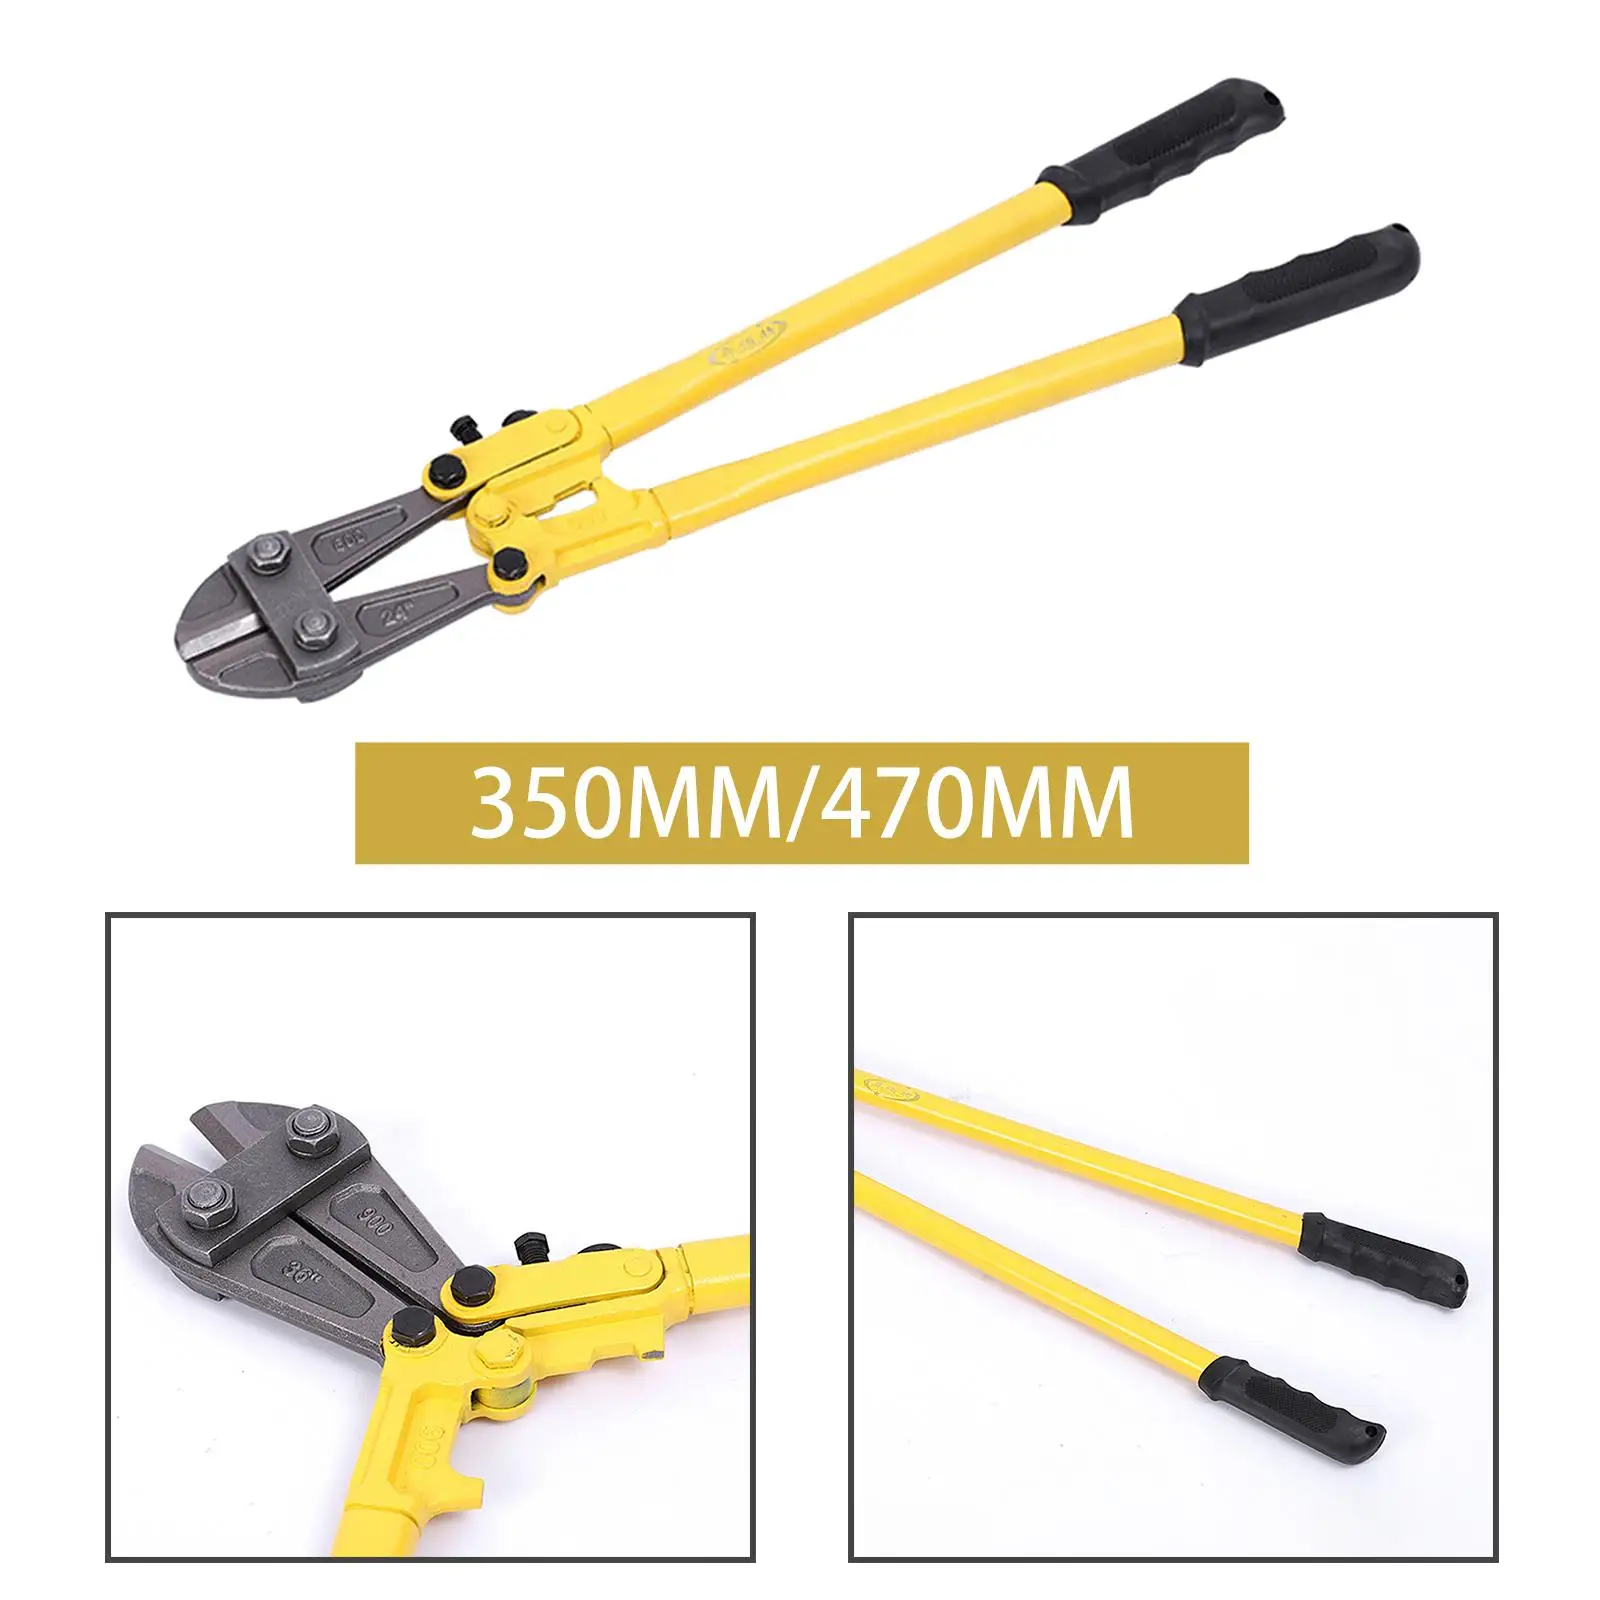 Bolt Cutter with Comfort Grip Heavy Duty Cable Cutter for Screws Rods Bolts